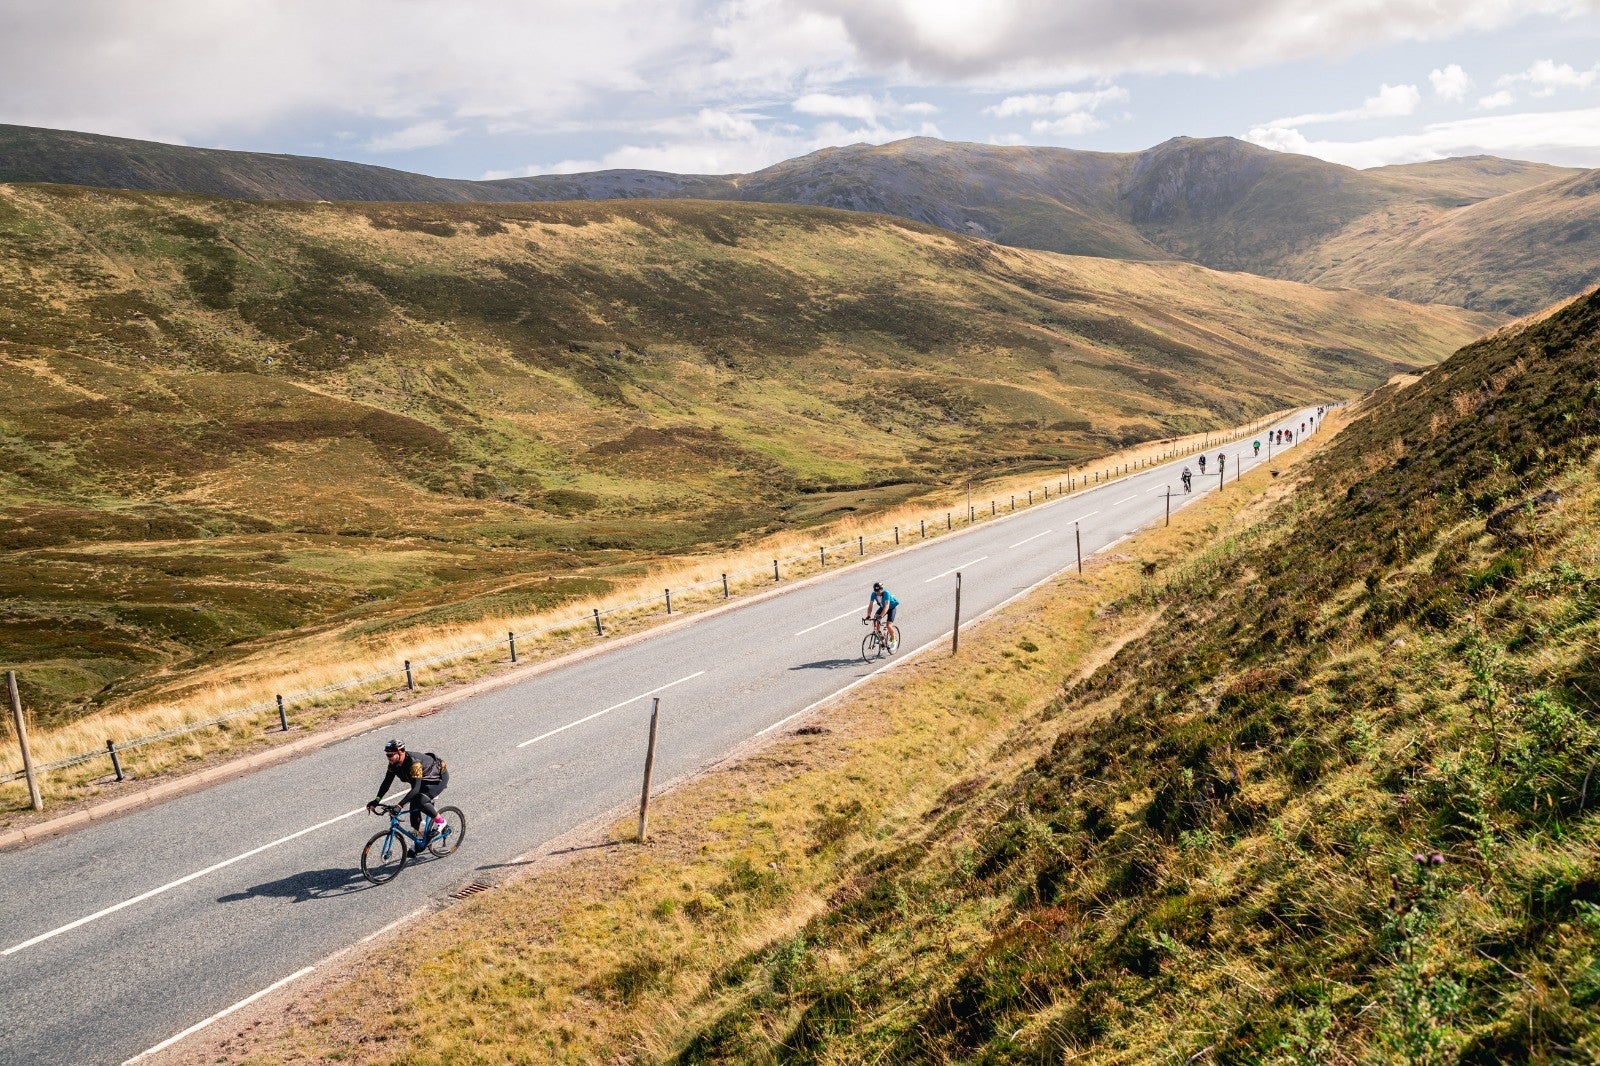 Lejog is a classic cycling challenge